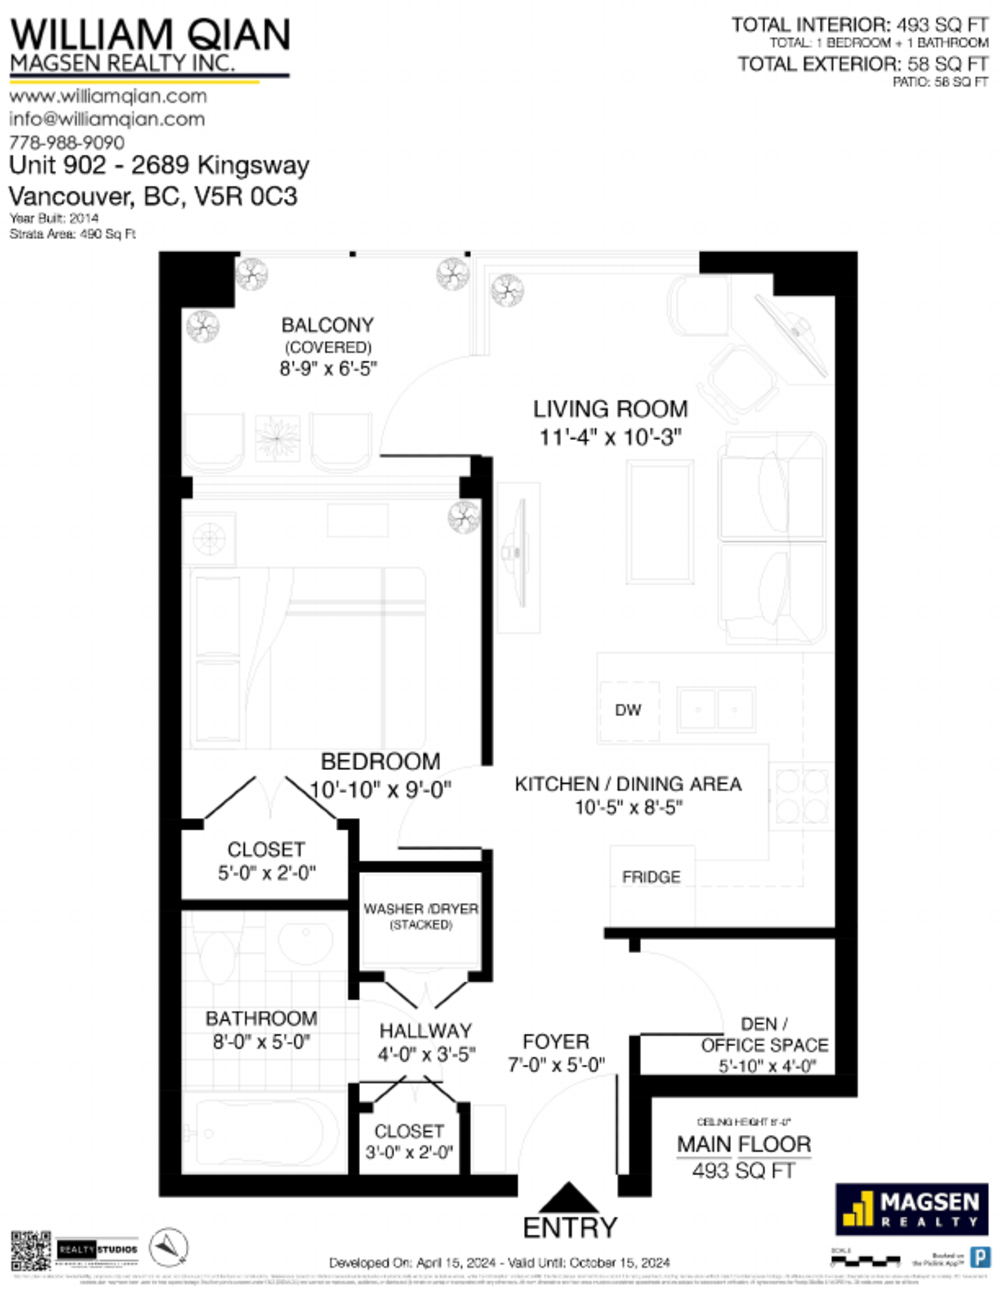 Floor Plan for a 1 Bedroom Apartment in Vancouver